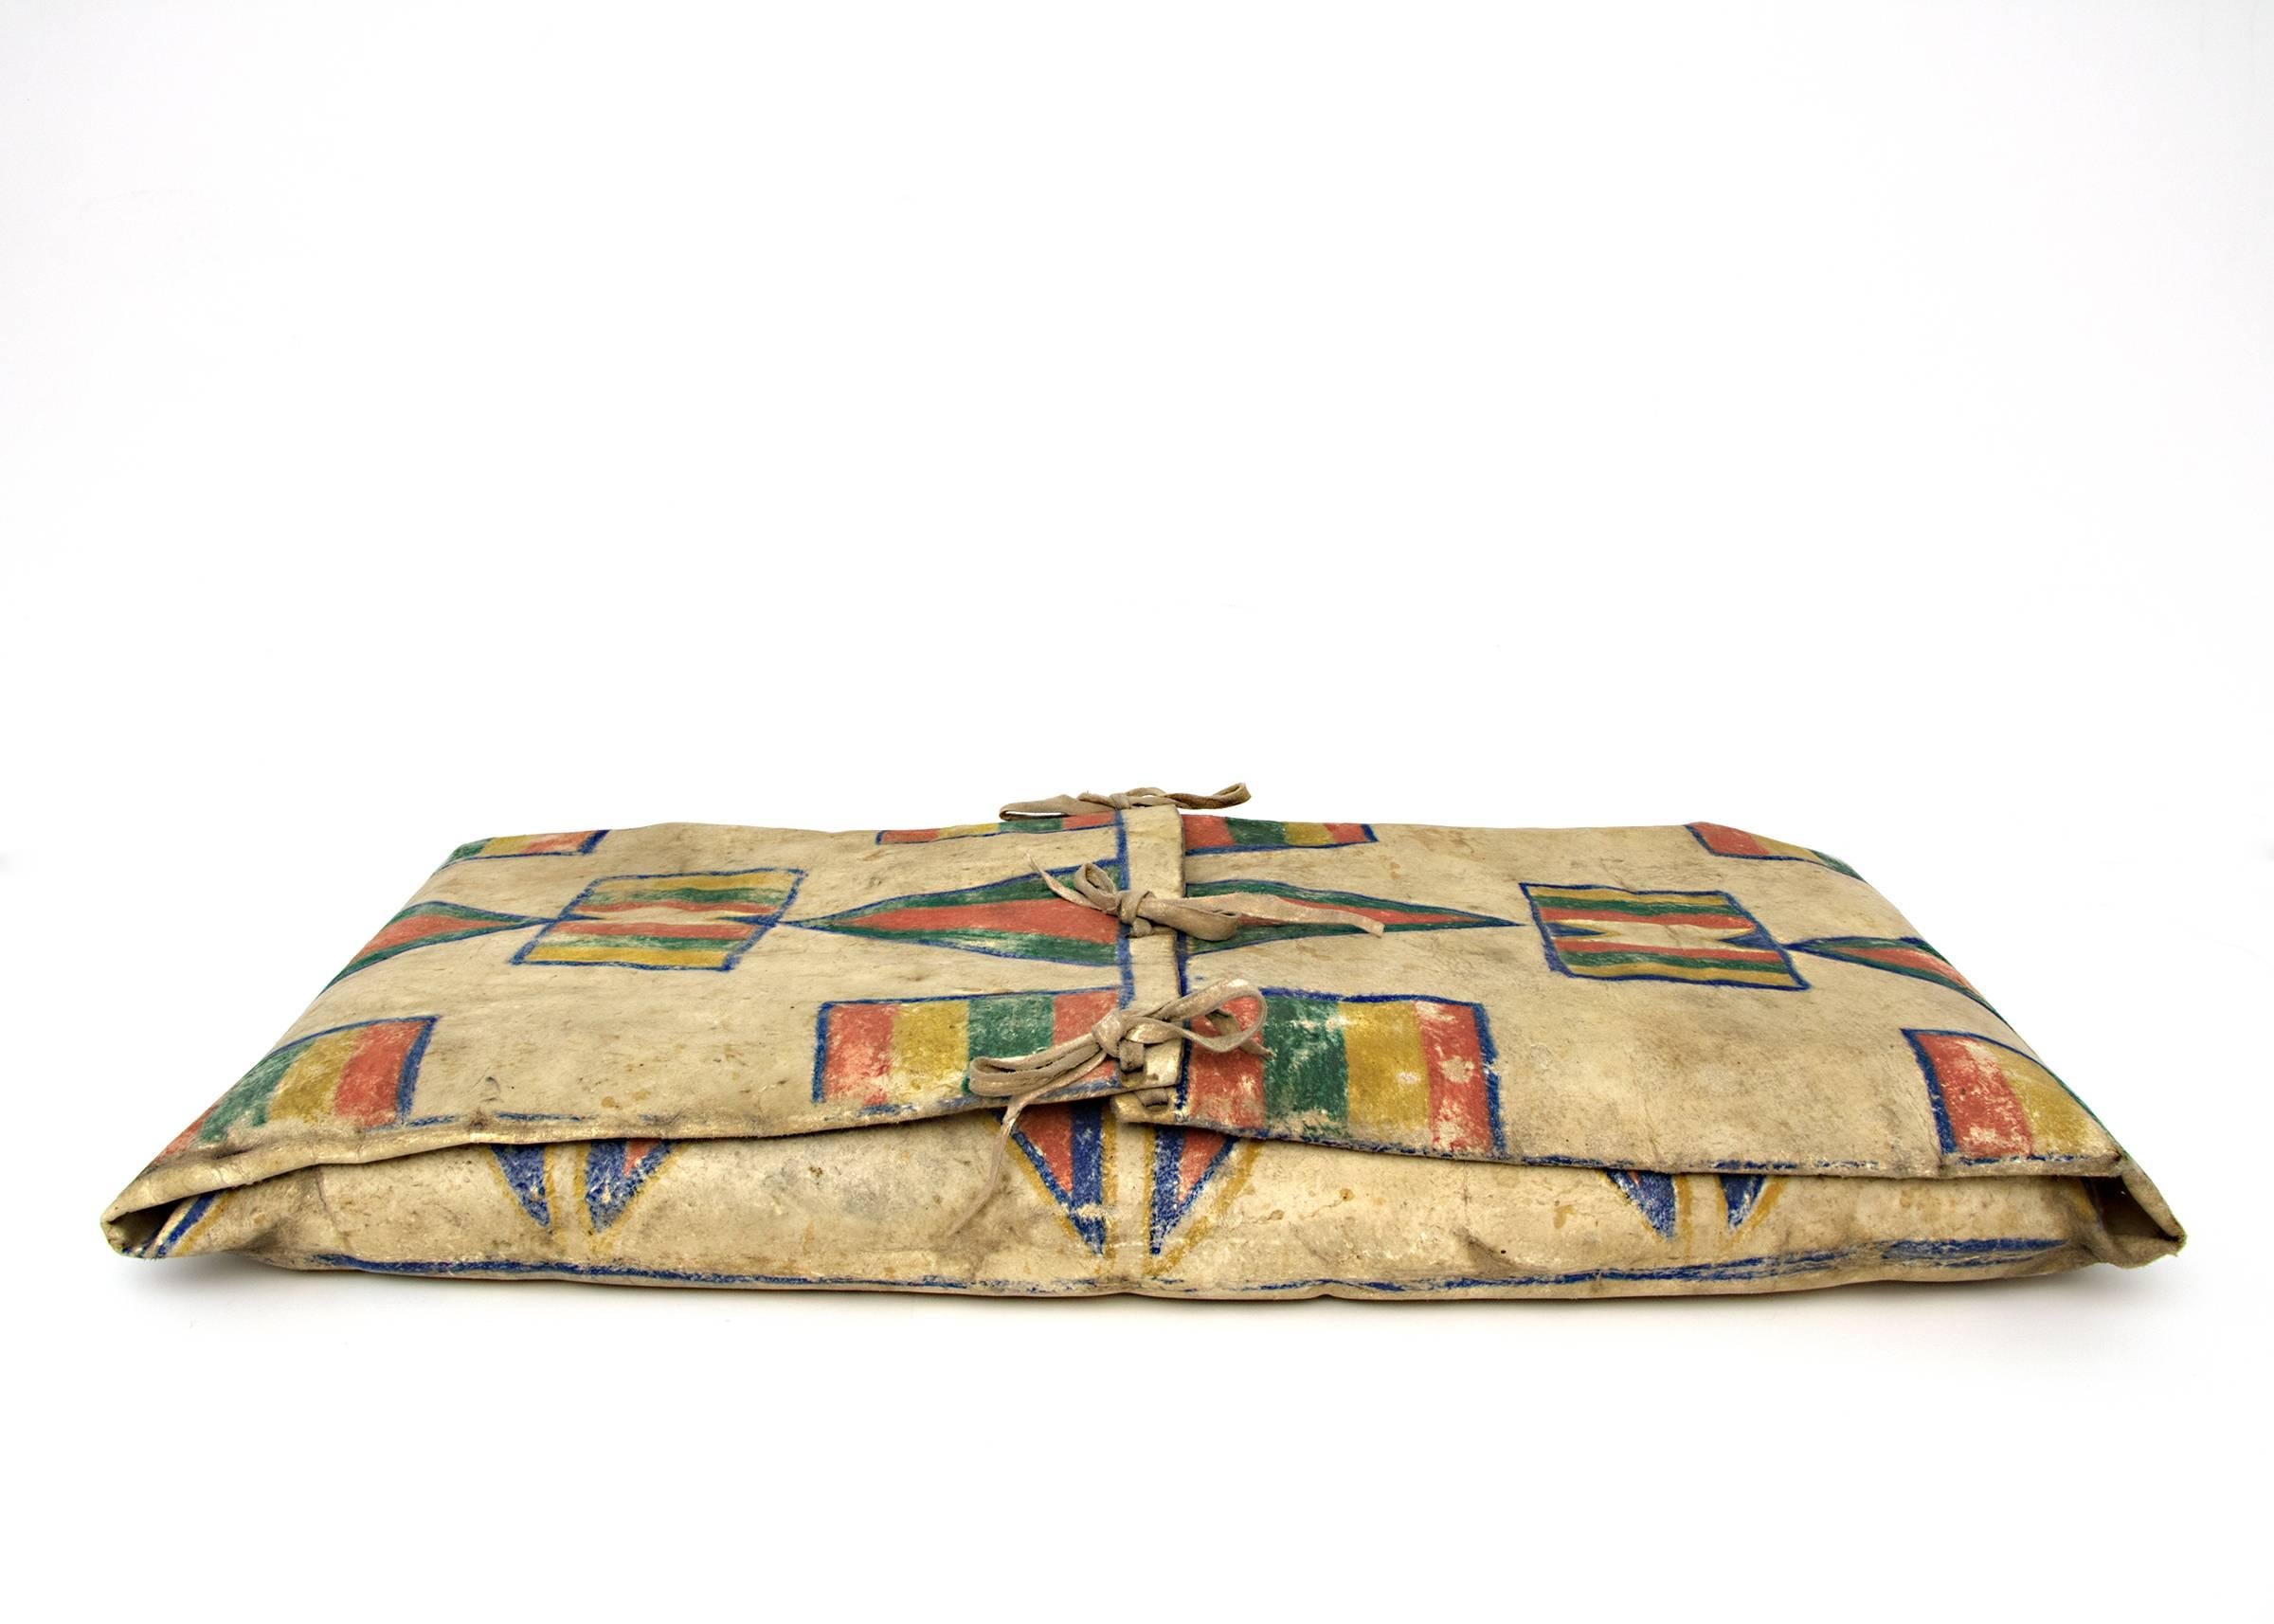 Painted Native American Parfleche Envelope with Abstract Painting, 19th Century, Plateau